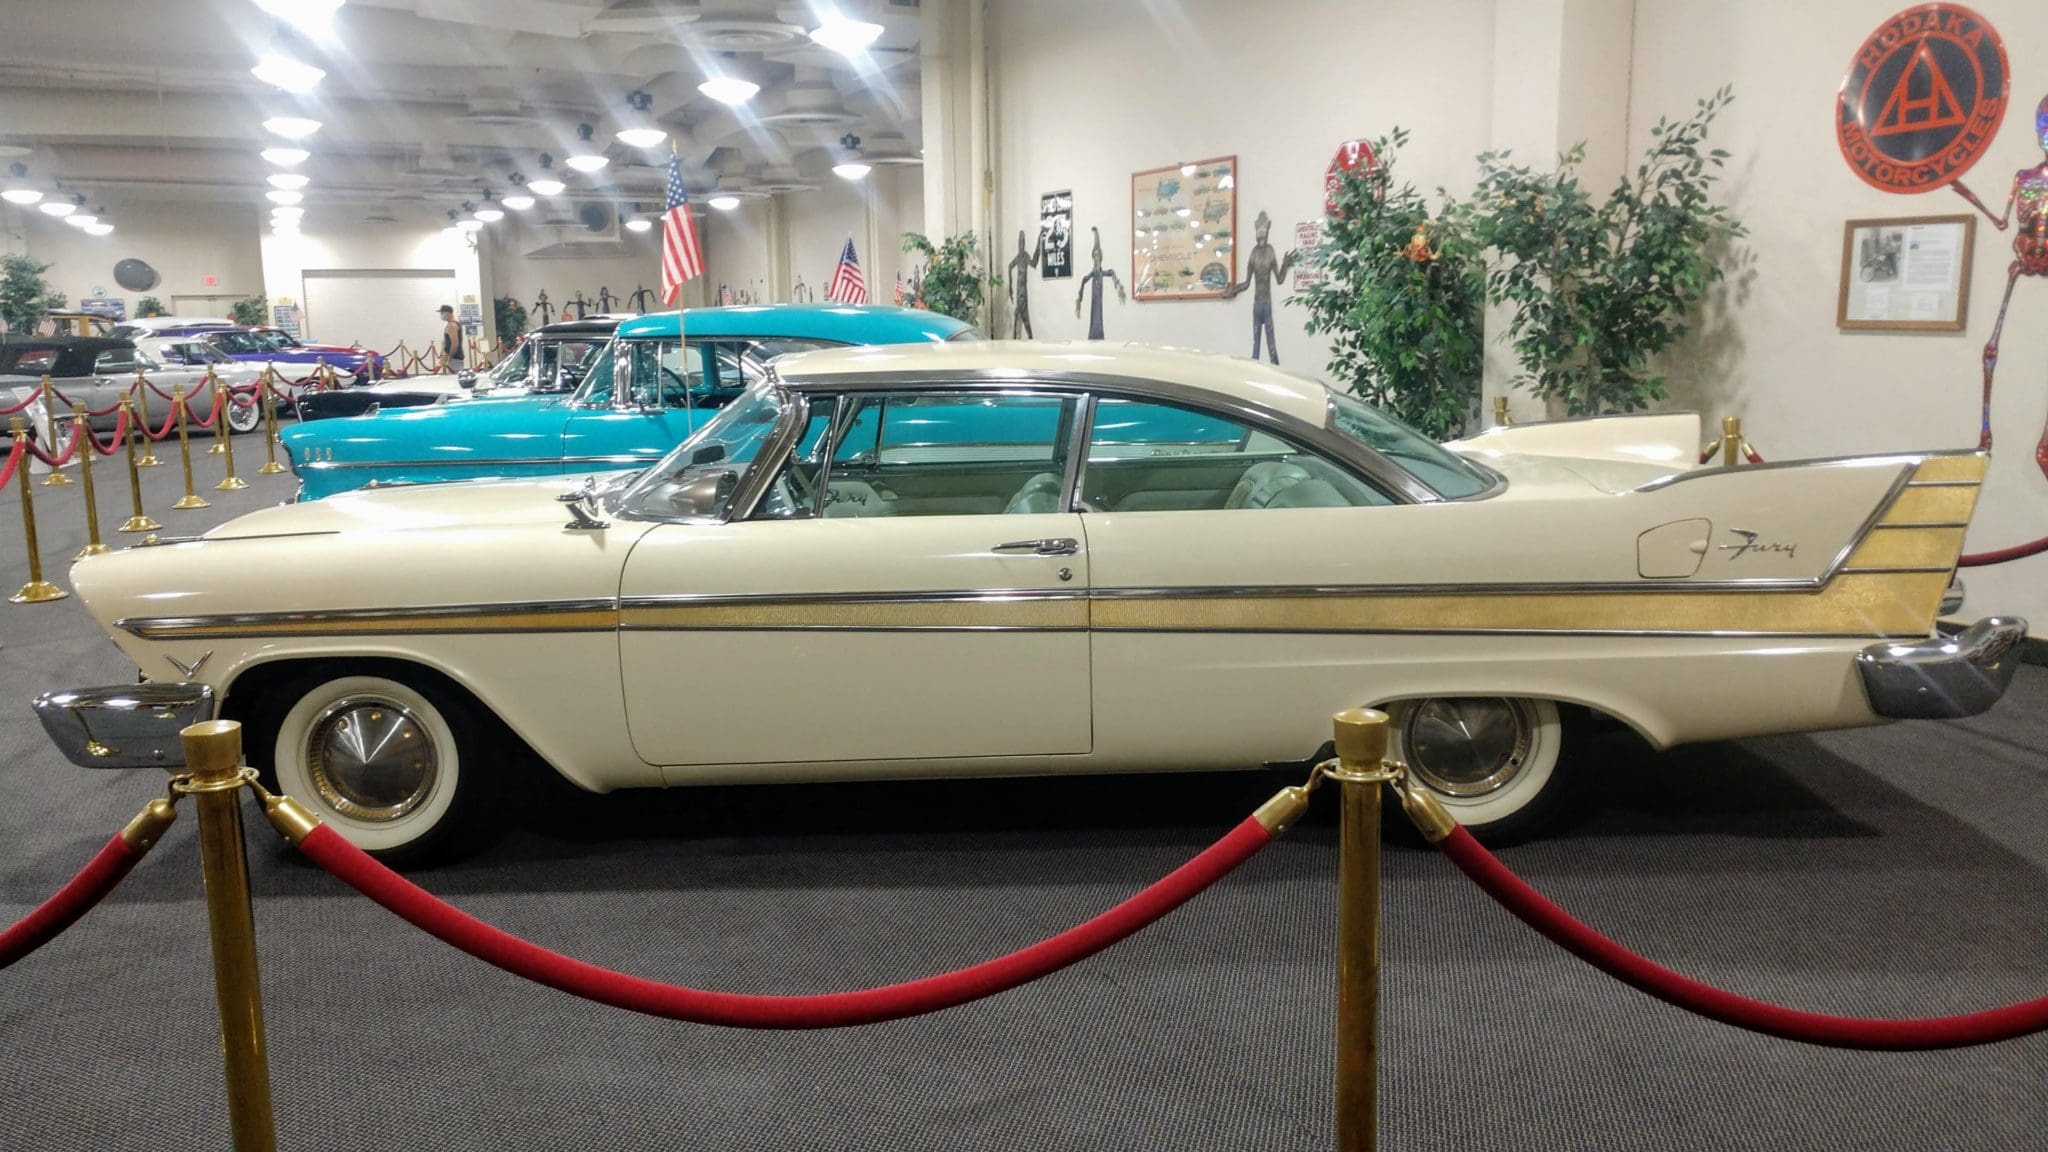 1957 Plymouth Golden Fury outshines the '57 Bel Air